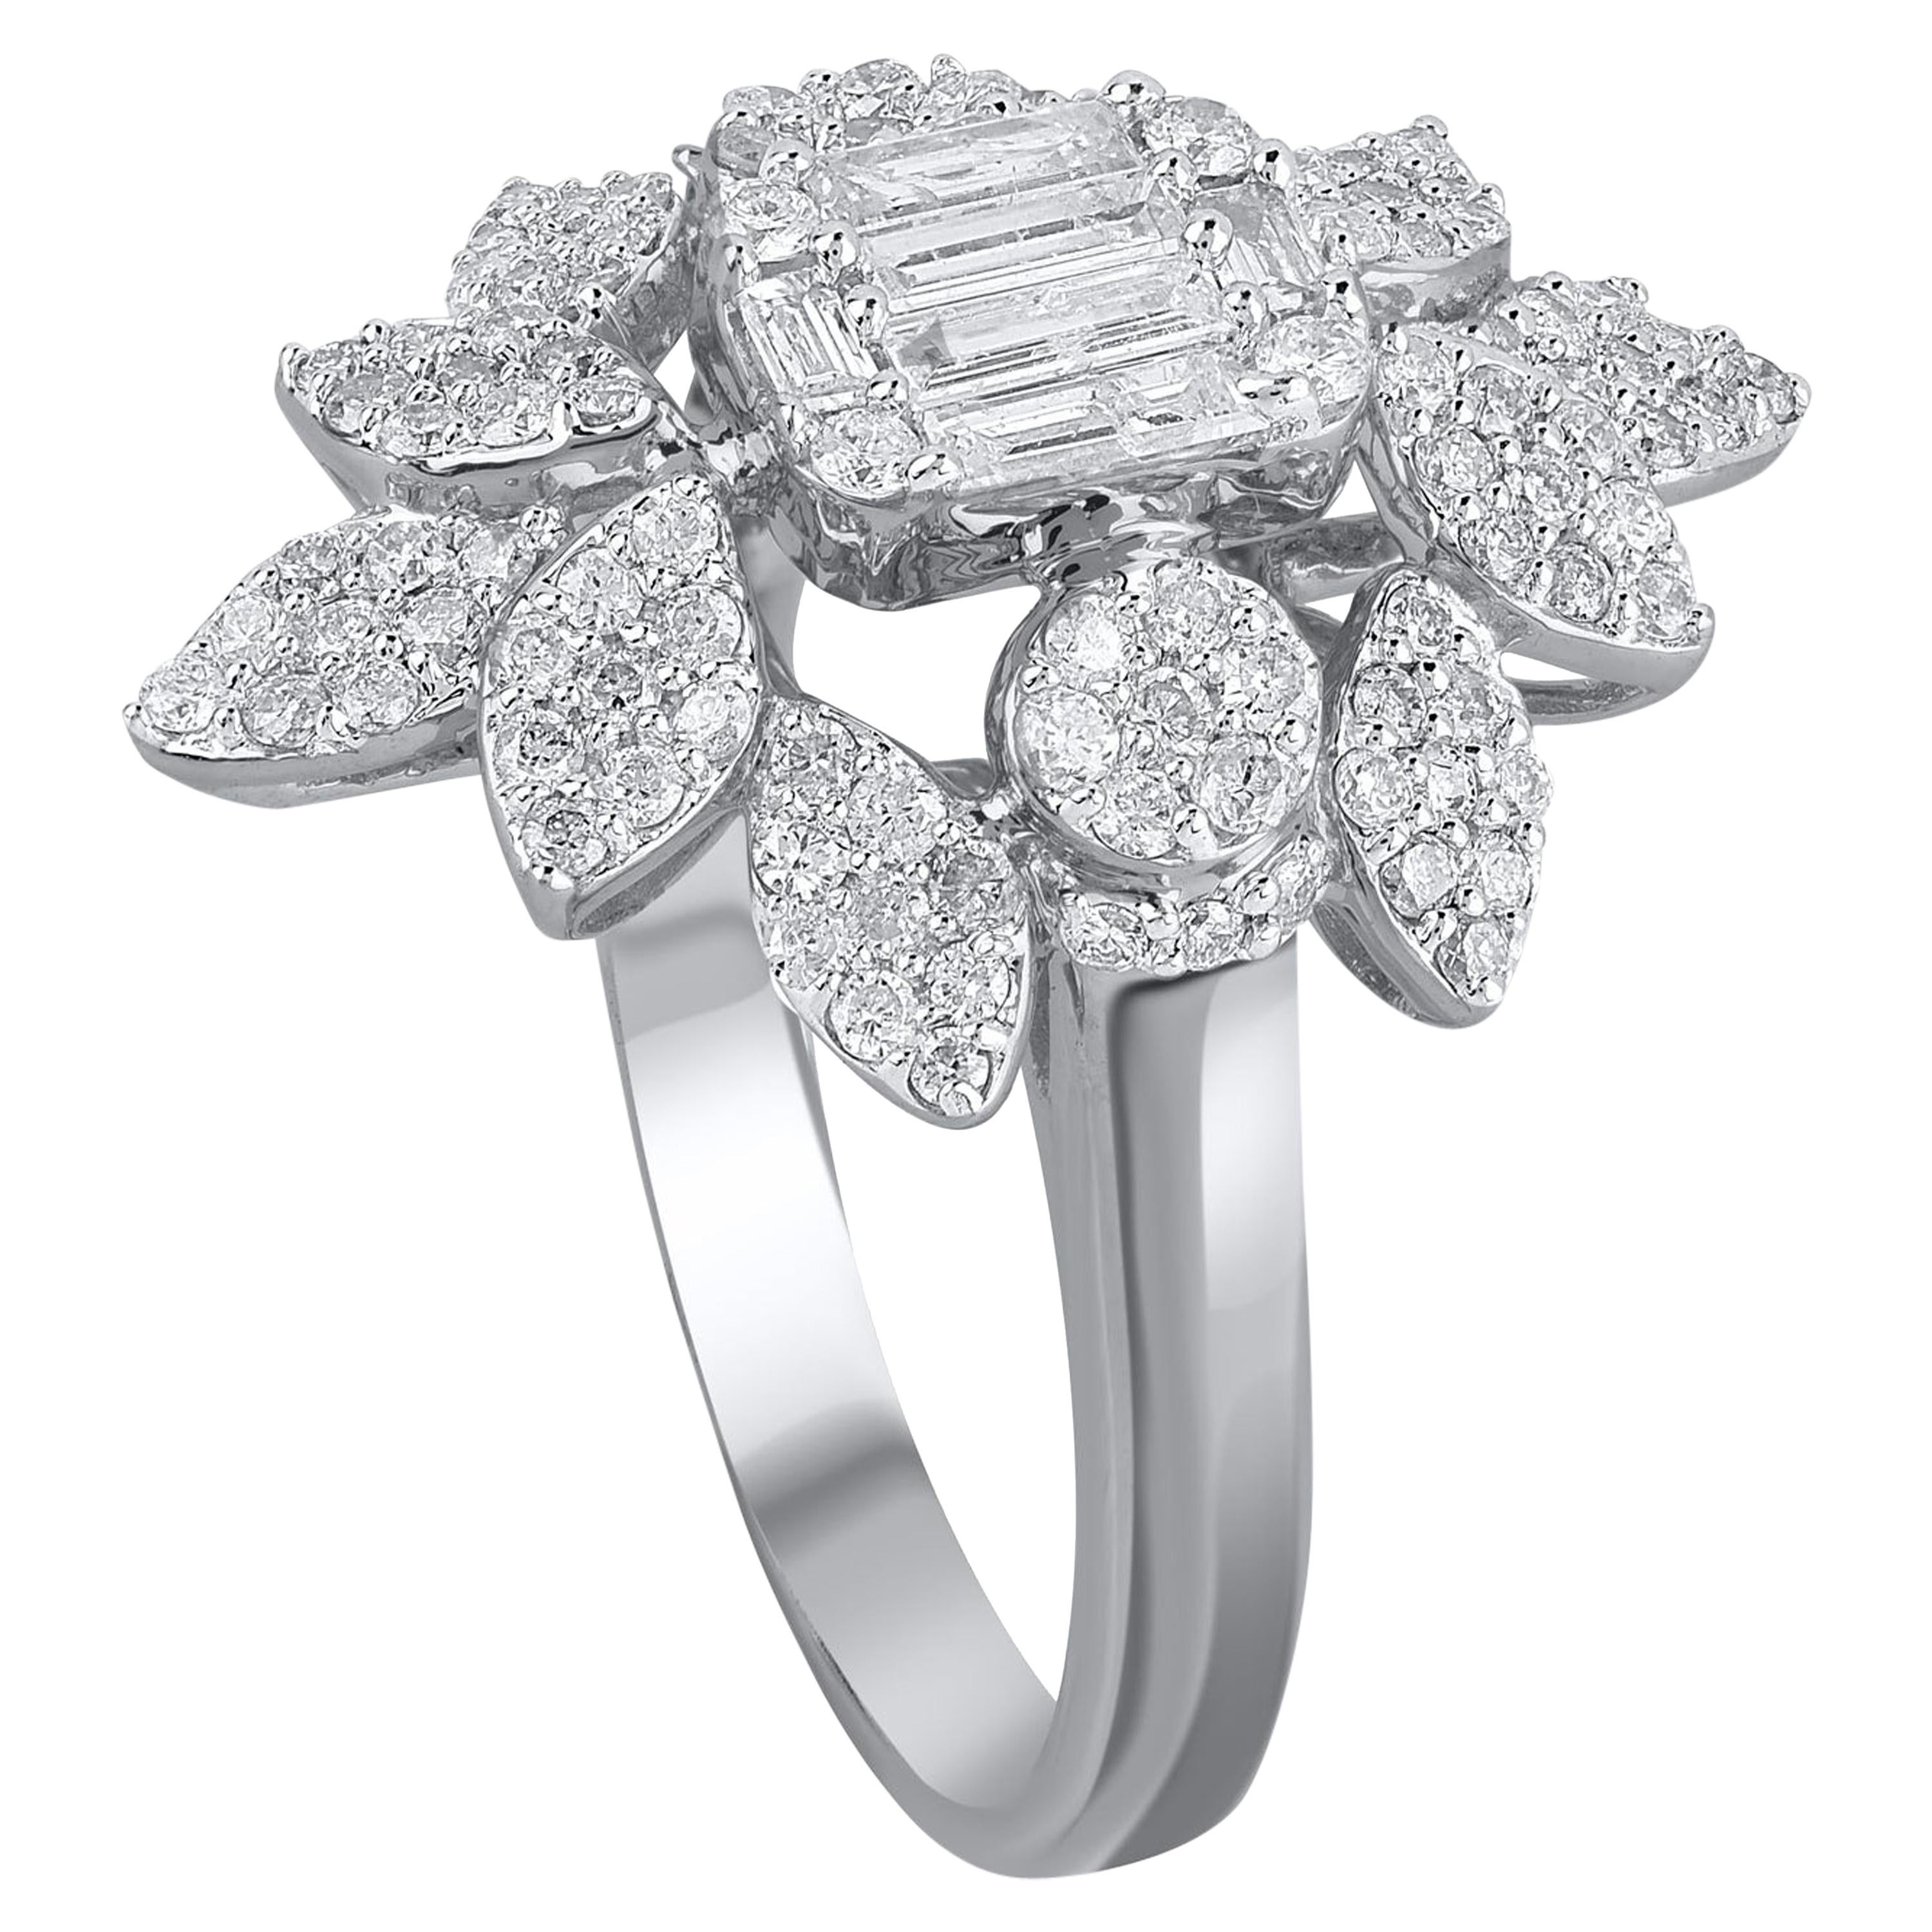 A centre baguette cut diamond surrounded by round diamonds in floral motifs. Studded with 114 round and 6 baguette diamonds in prong setting in 18 kt white gold. Diamonds are graded JK color, I3 clarity.   

Metal color and ring size can be